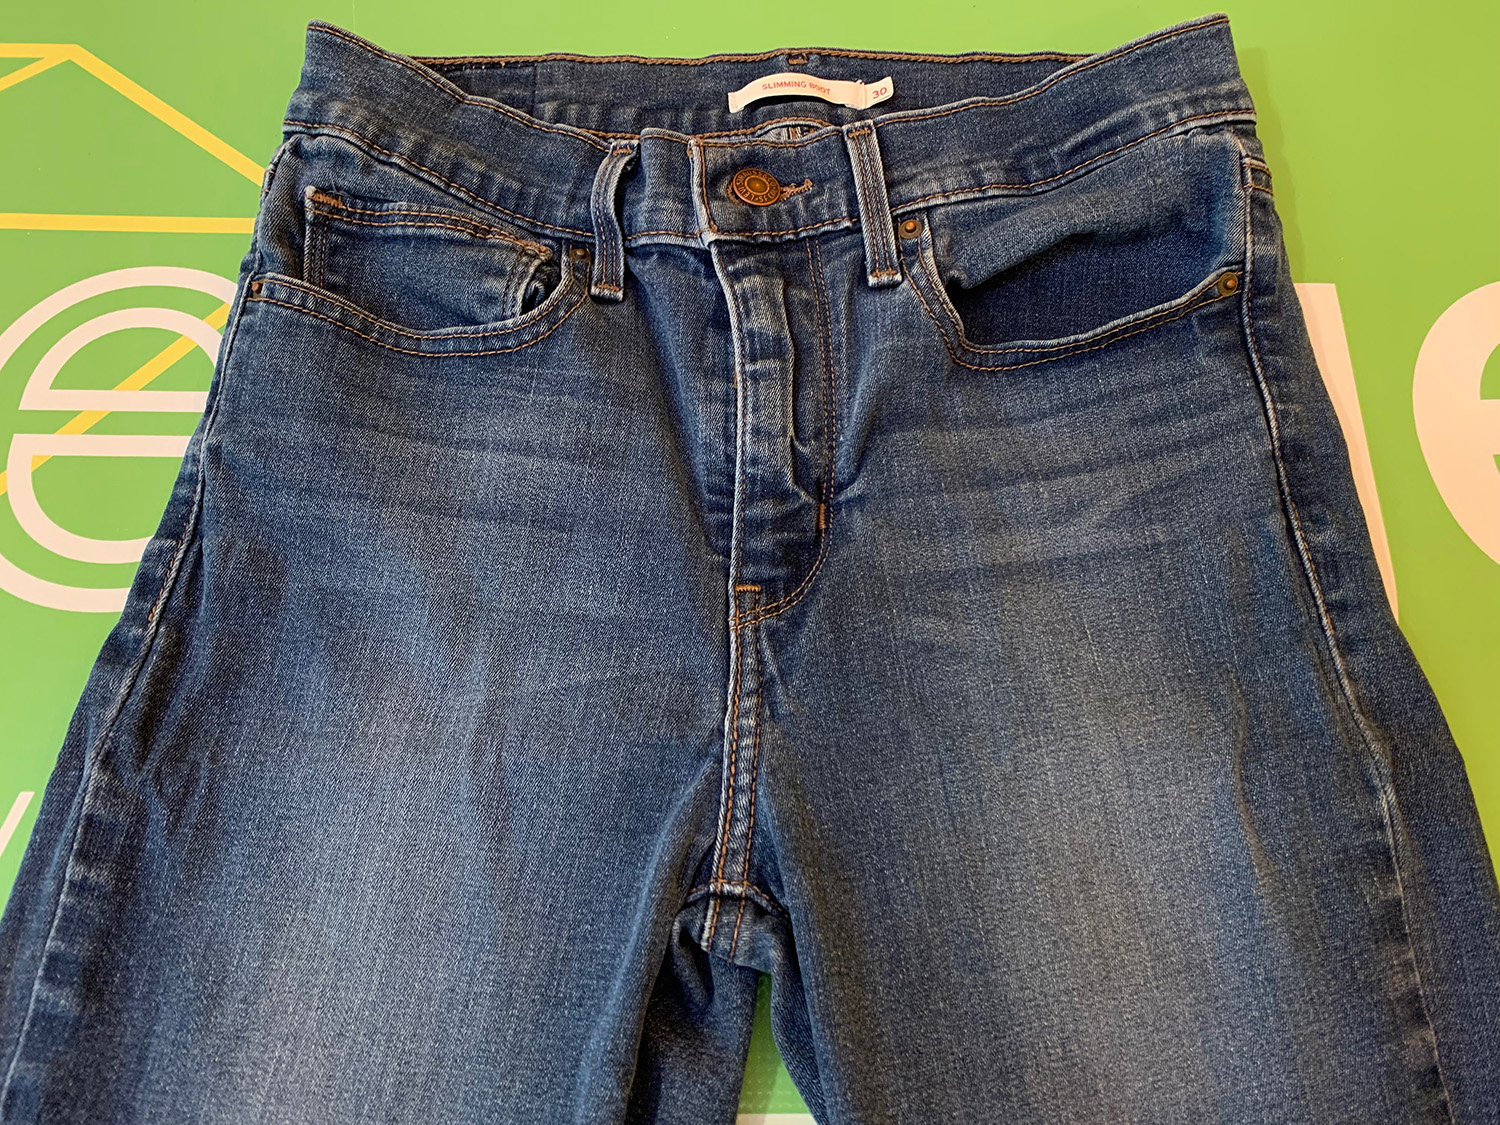 Levis Womens Slimming Boot Jeans Size 30 at The MenuGem Web Store